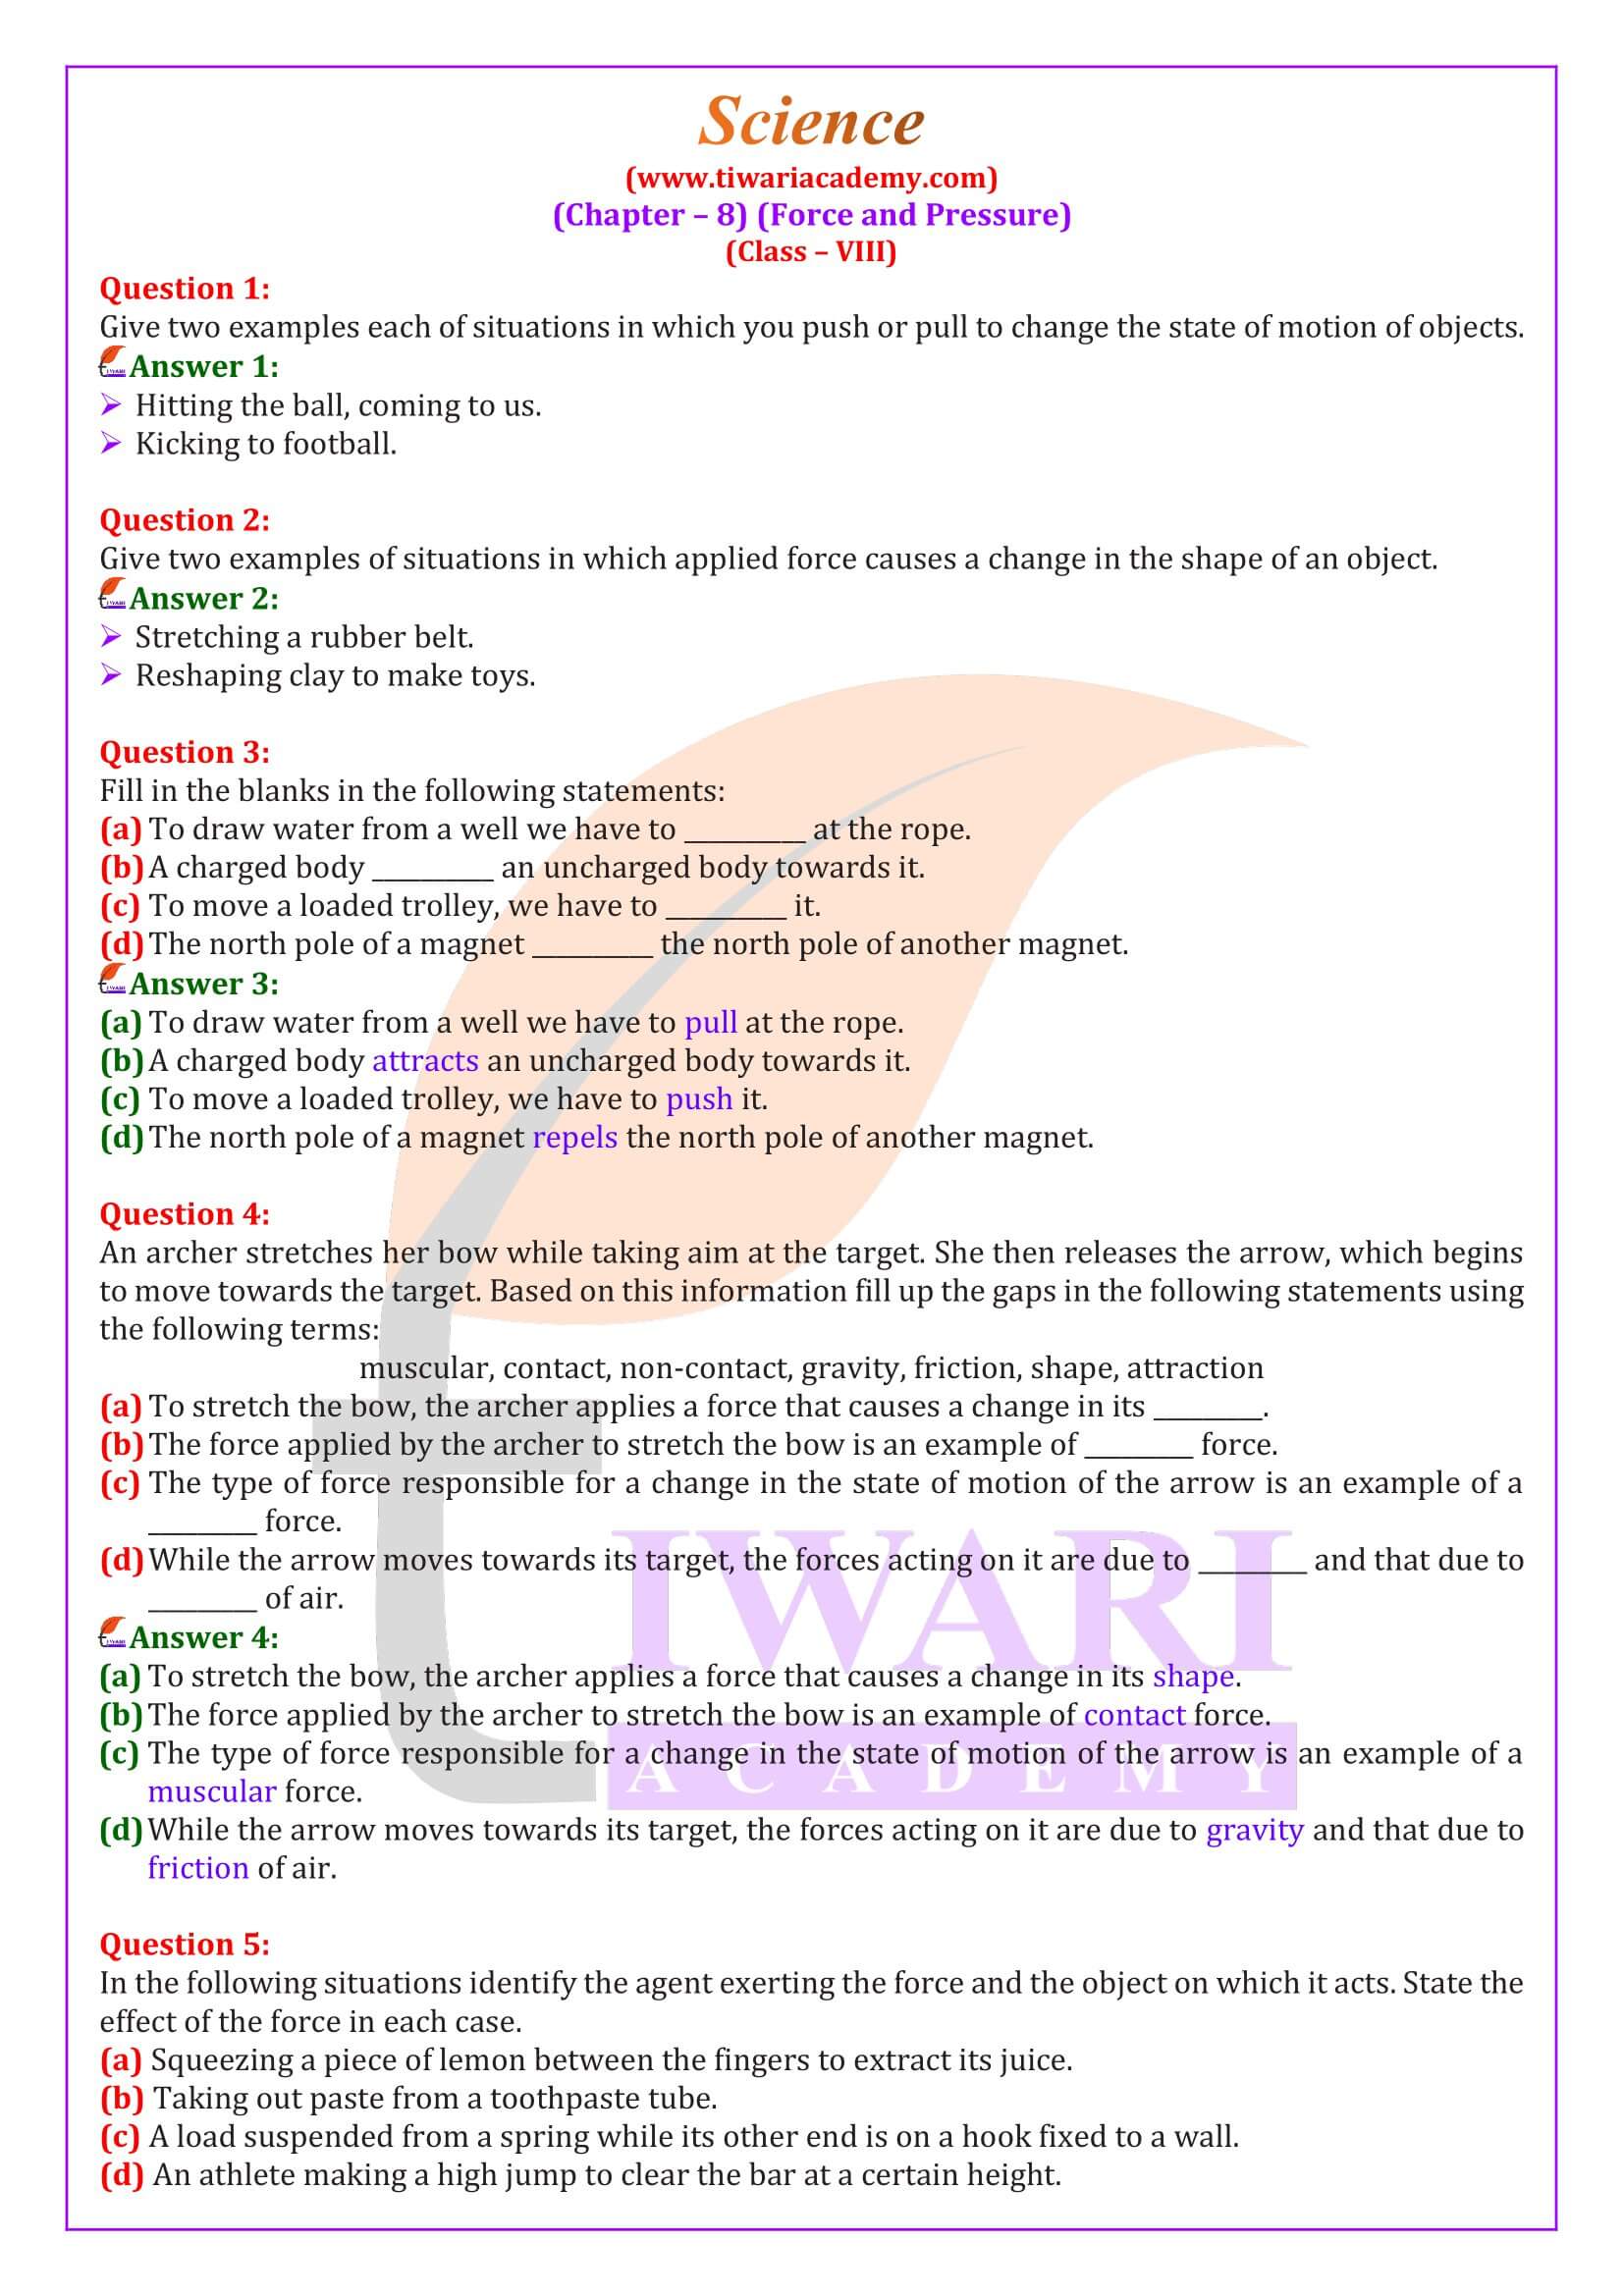 NCERT Solutions for Class 8 Science Chapter 8